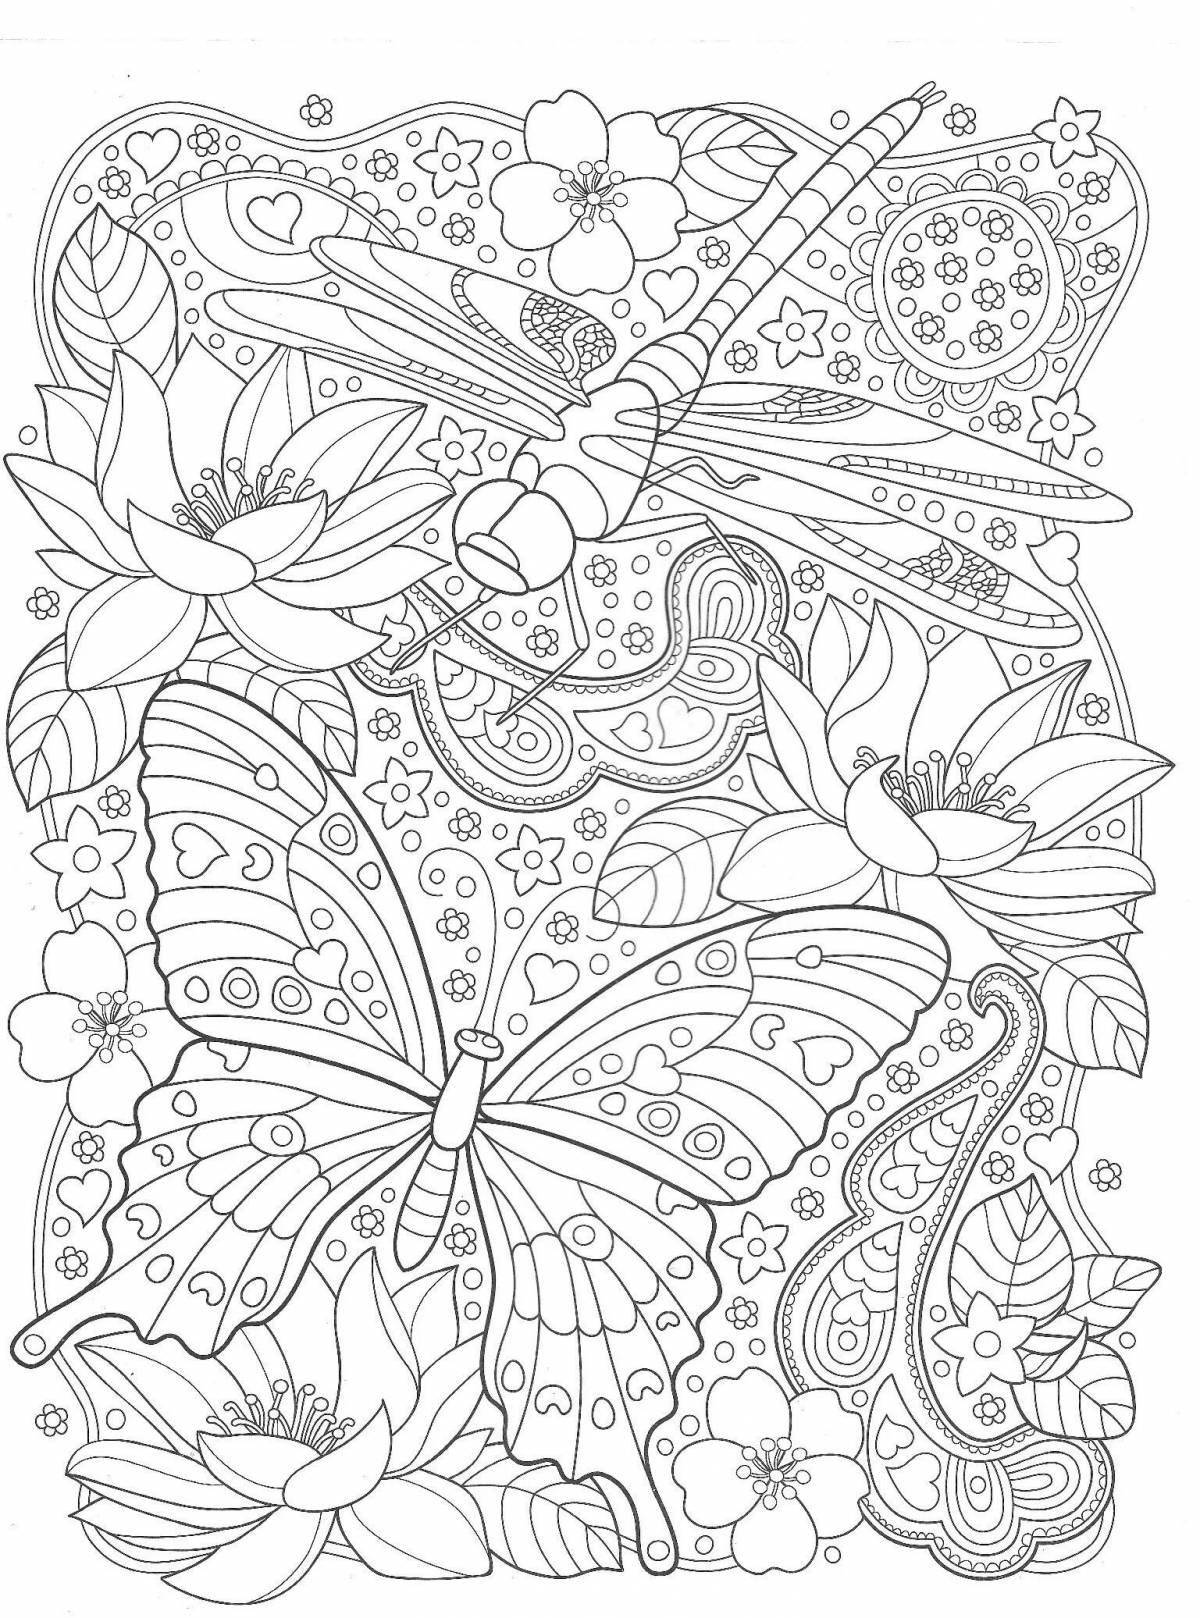 Glitter coloring book for adults